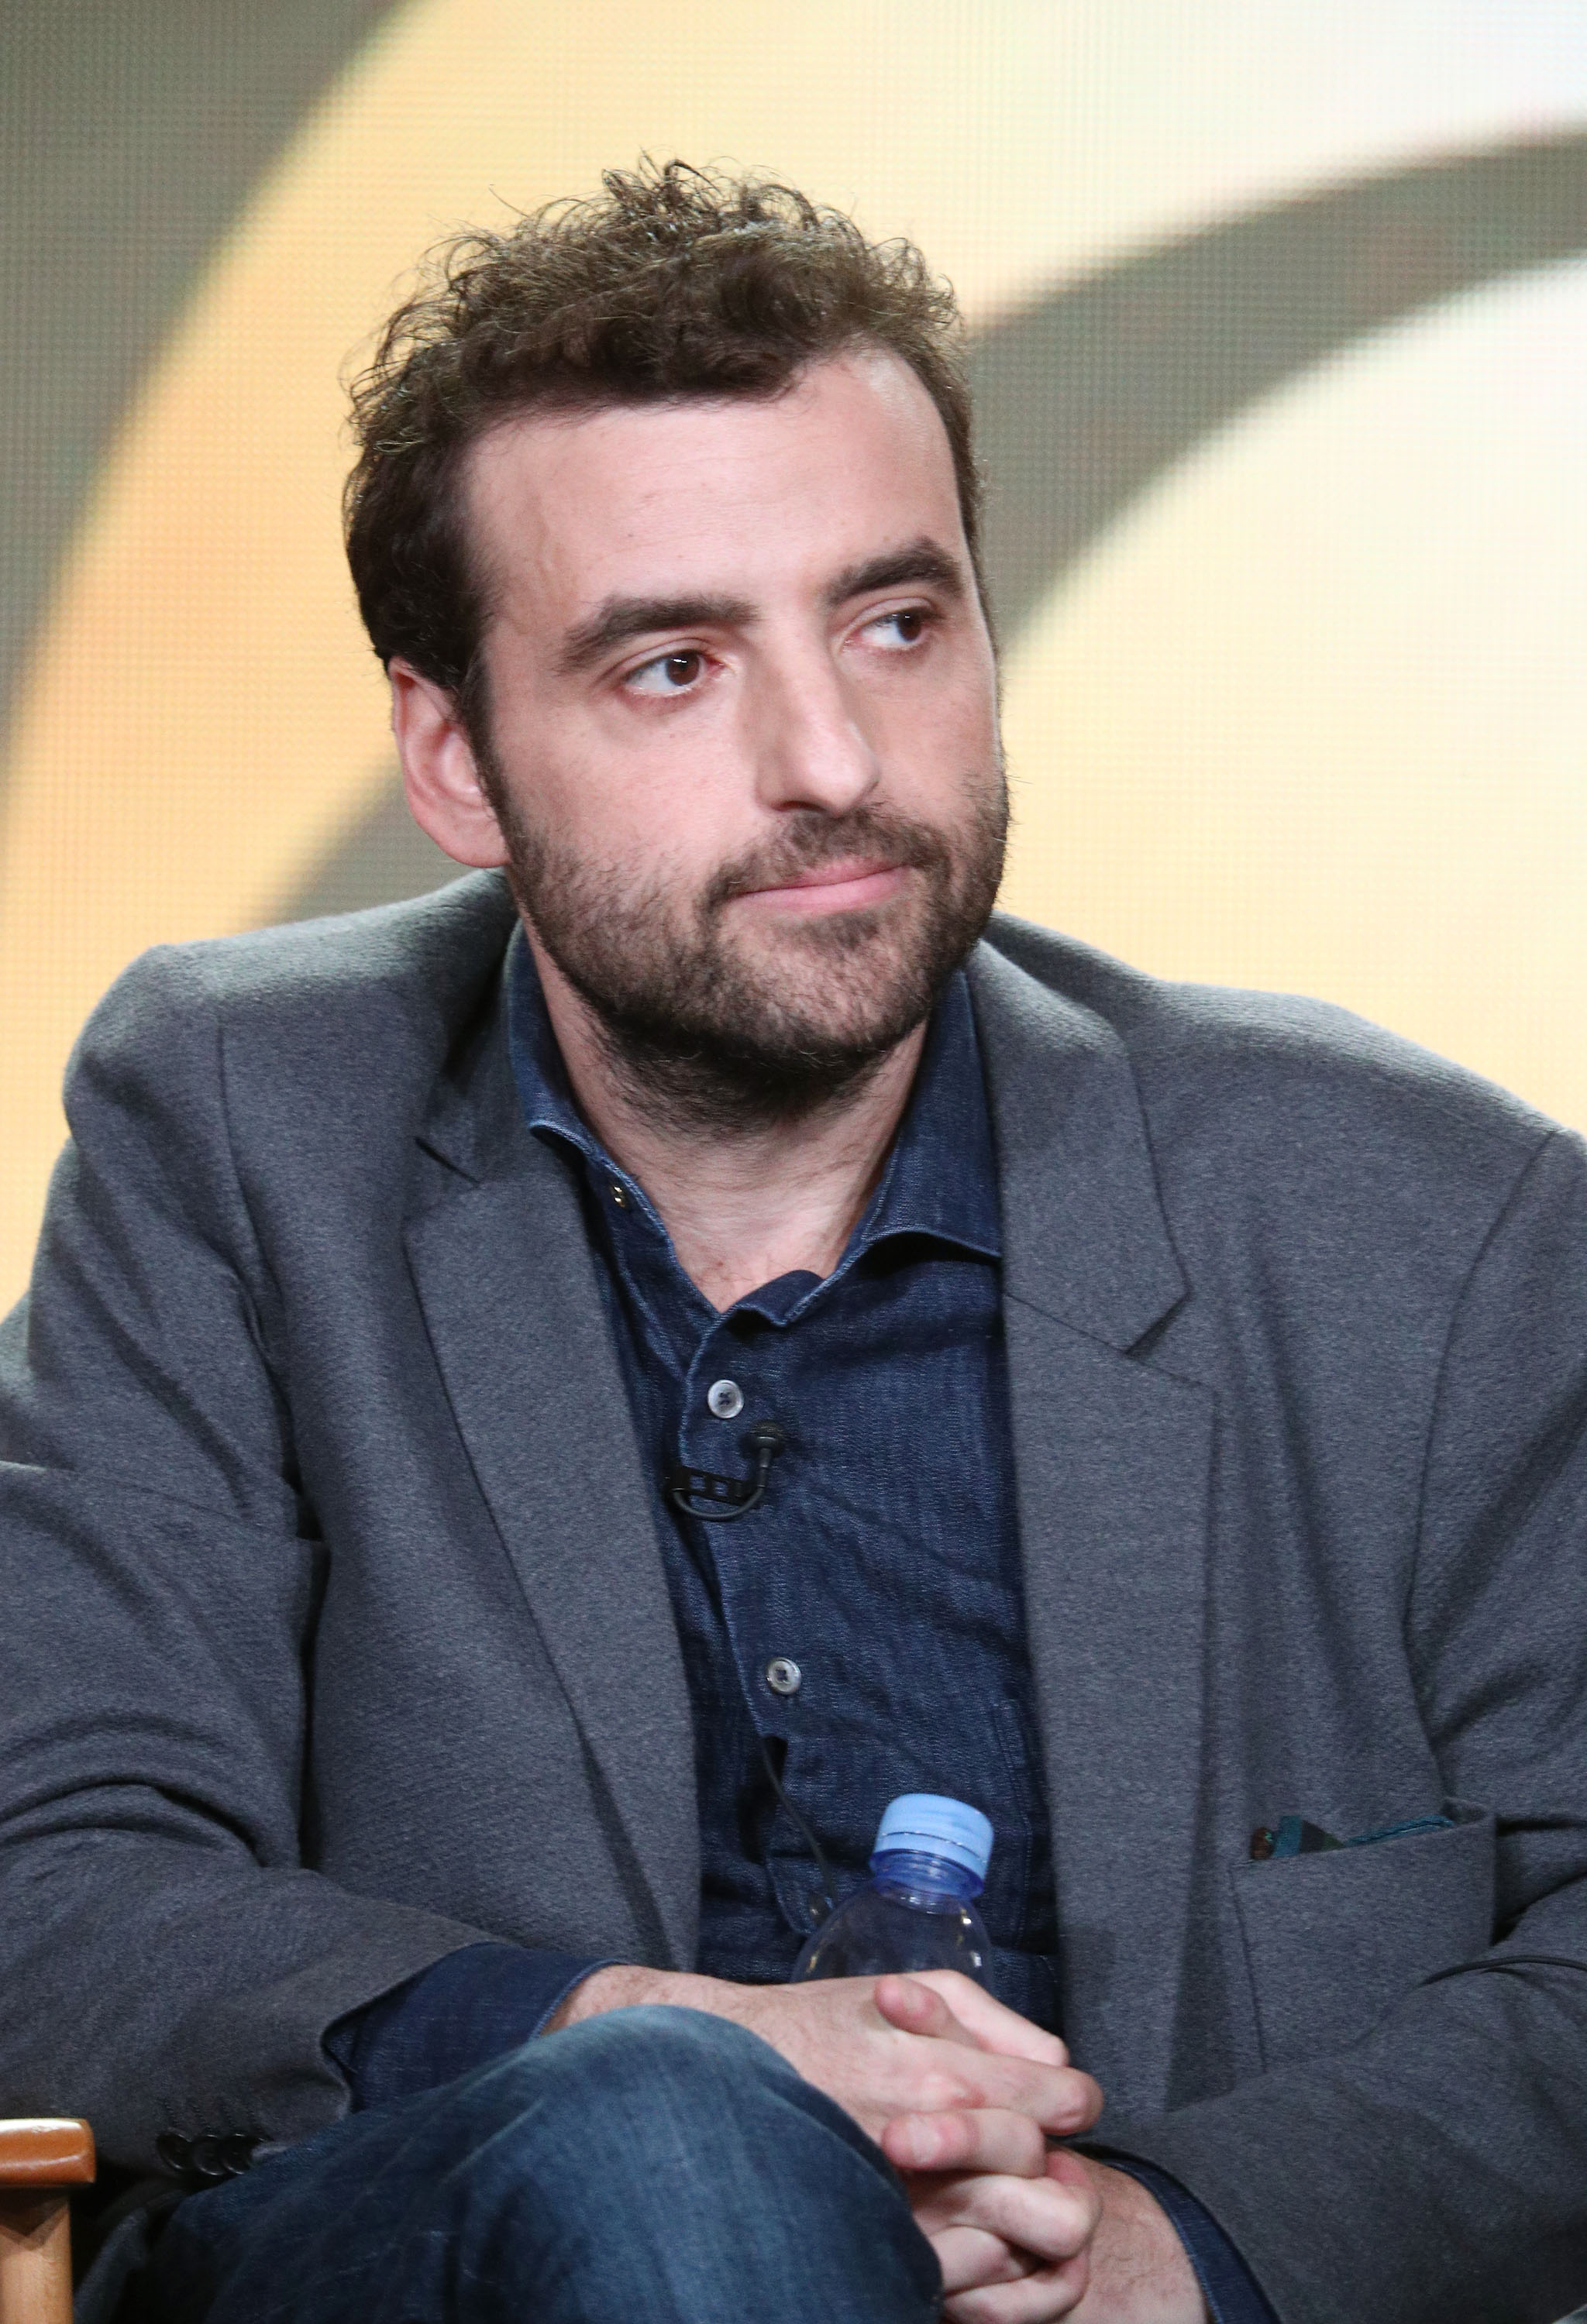 Actor David Krumholtz of the television show Living Biblically speaks onstage during the CBS/Showtime portion of the 2018 Winter Television Critics Association Press Tour at The Langham Huntington, Pasadena on January 6, 2018 in Pasadena, California. (Photo by Frederick M. Brown/Getty Images) (Frederick M. Brown—Getty Images)